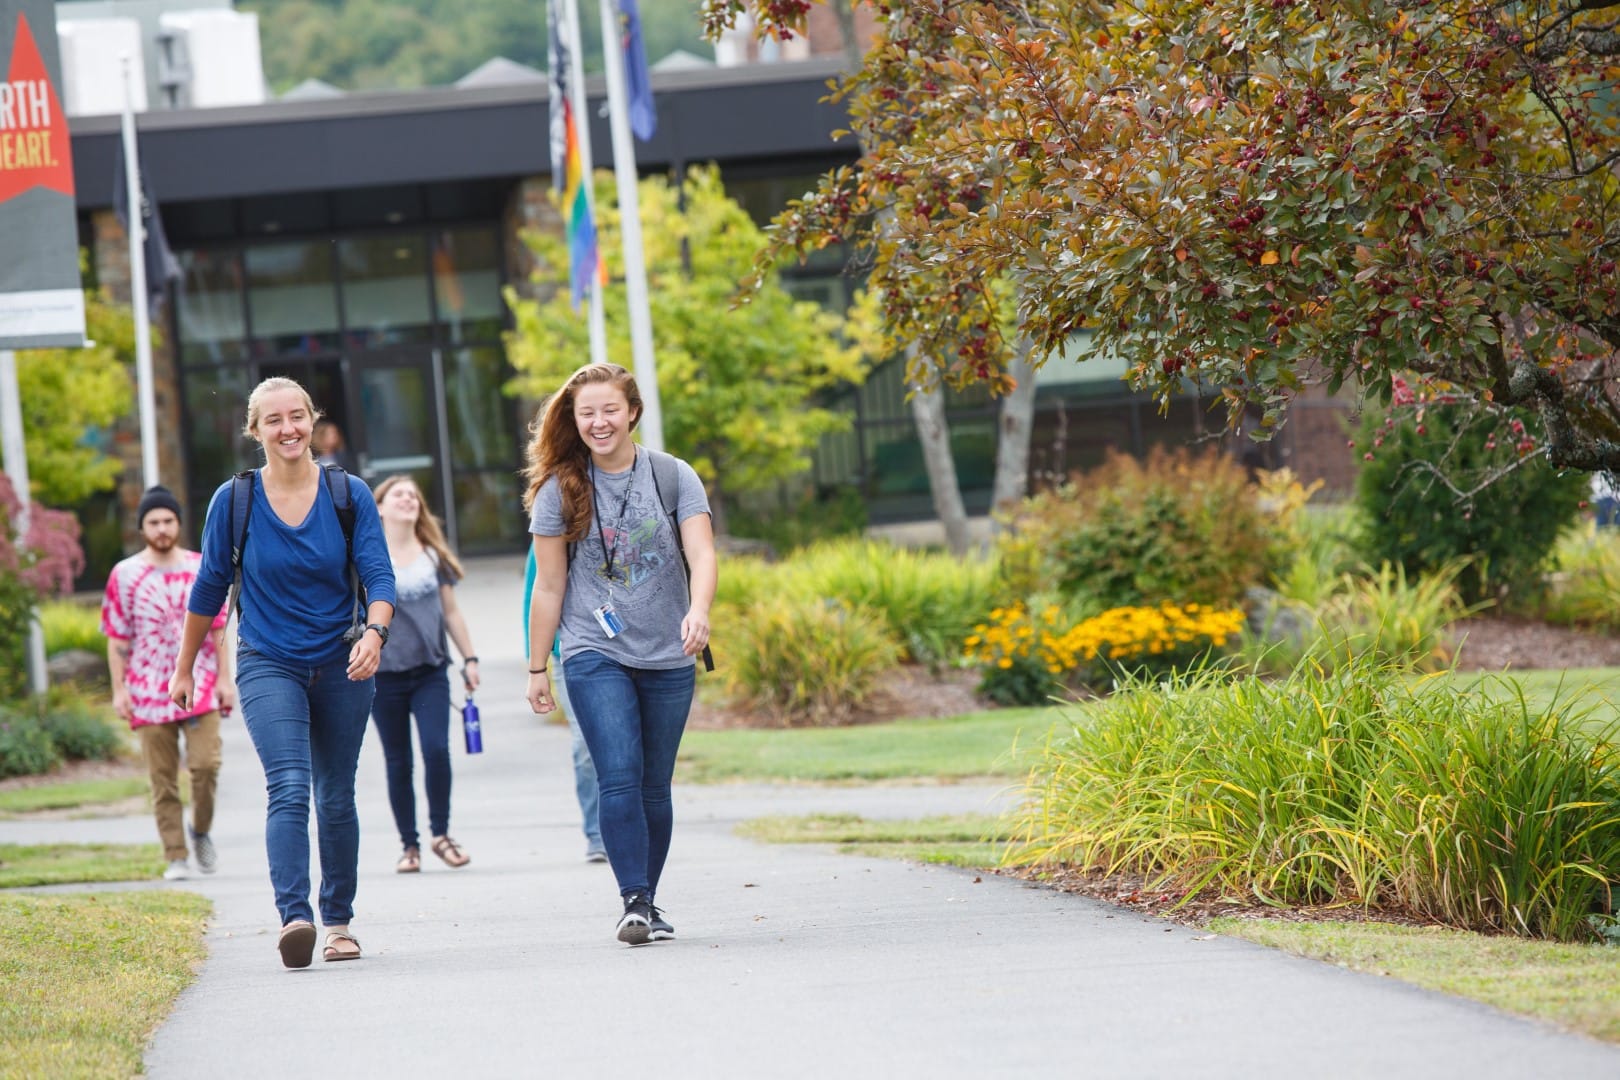 Two young women walking on a paved path in late summer on the Vermont State University Johnson campus.